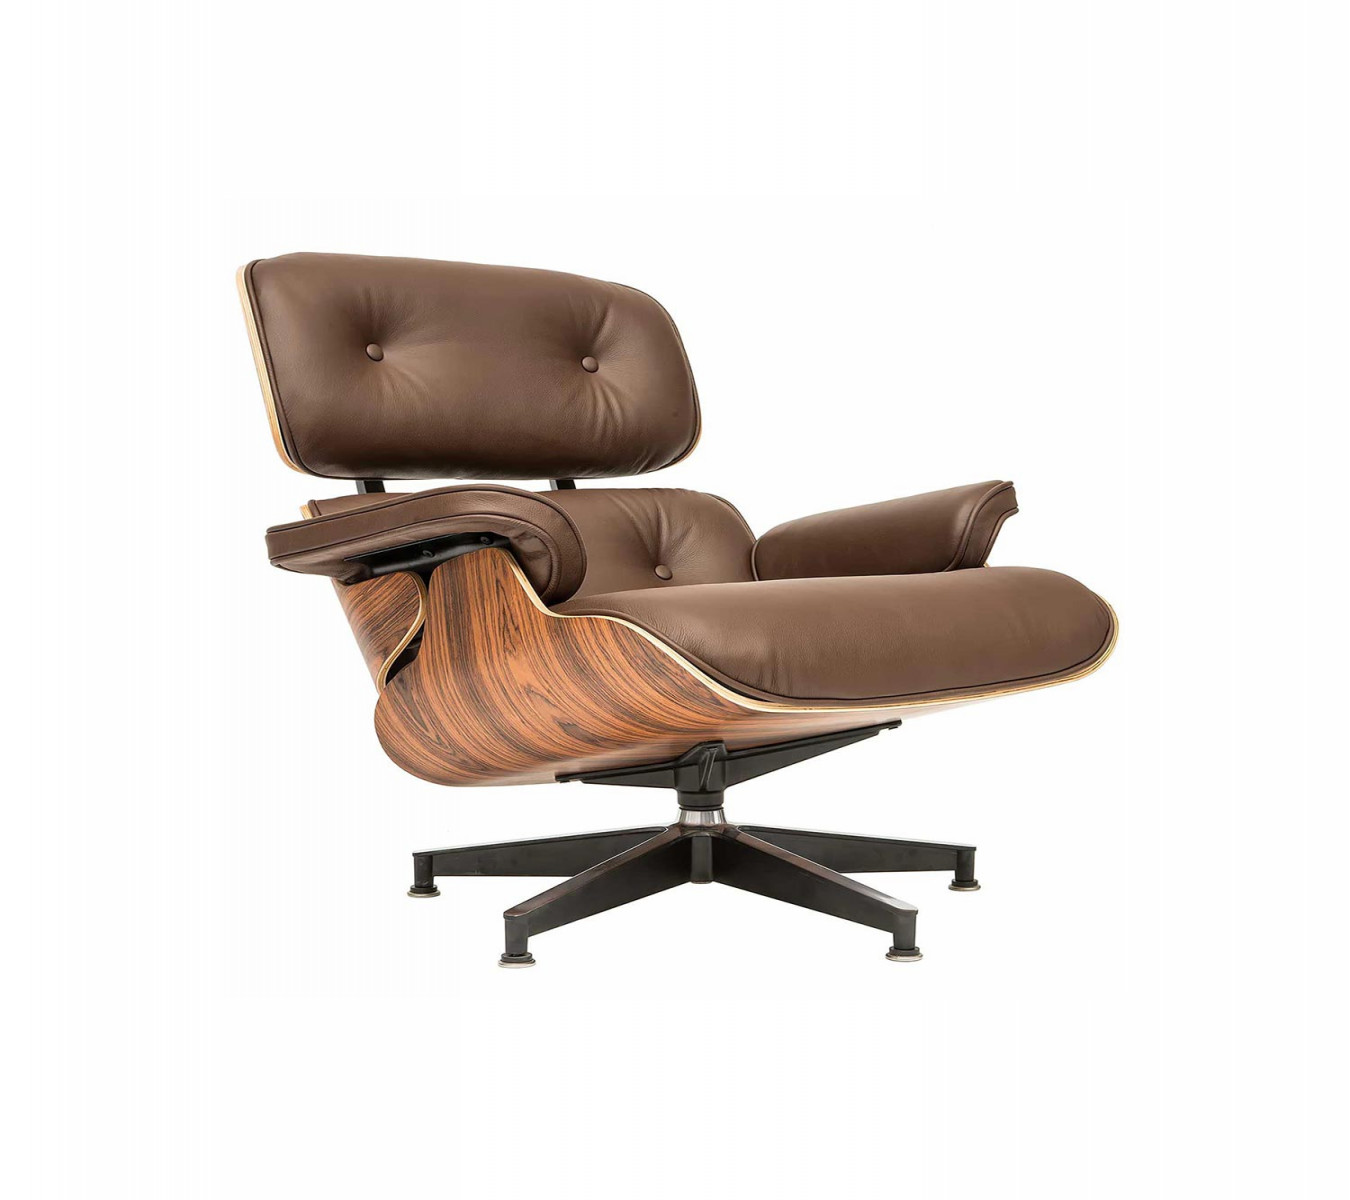 Eames designed Lounge Chair with Ottoman  a steelform design classic